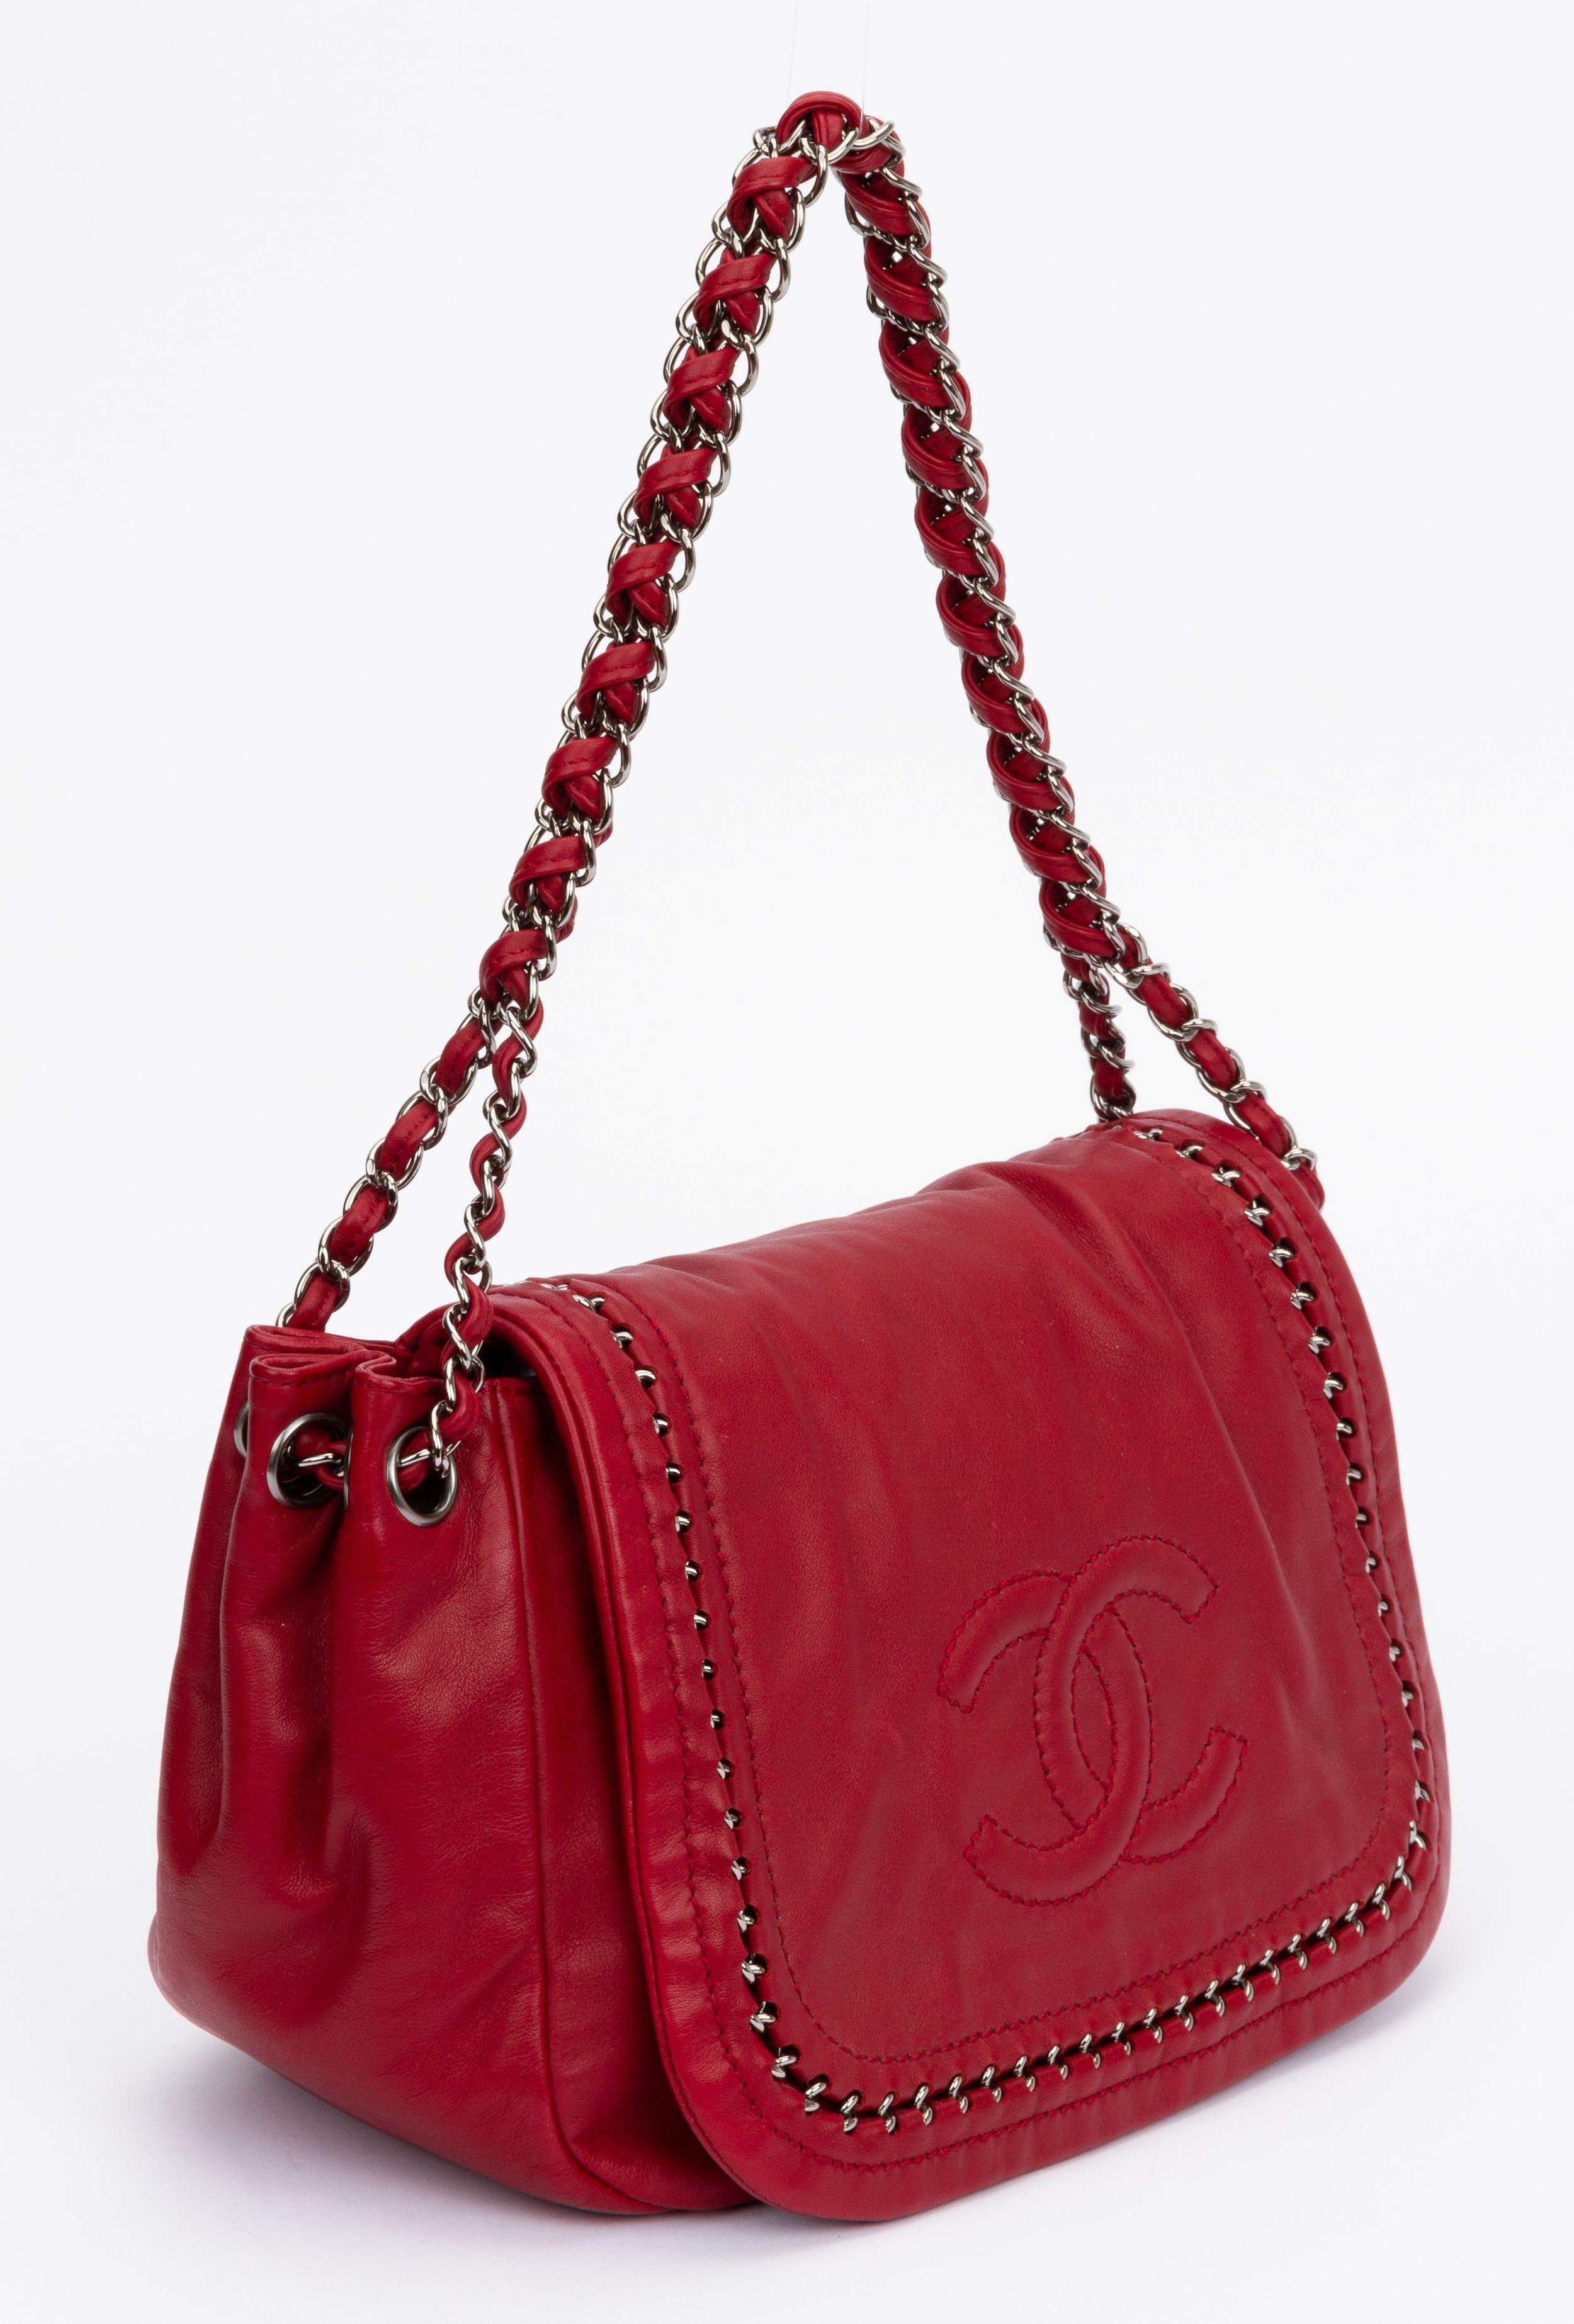 Chanel cherry red leather shoulder bag with chain inlay decoration. Very good condition, pen marks inside photographed in the last phot. Outer leather in excellent condition. Shoulder drop 9.5